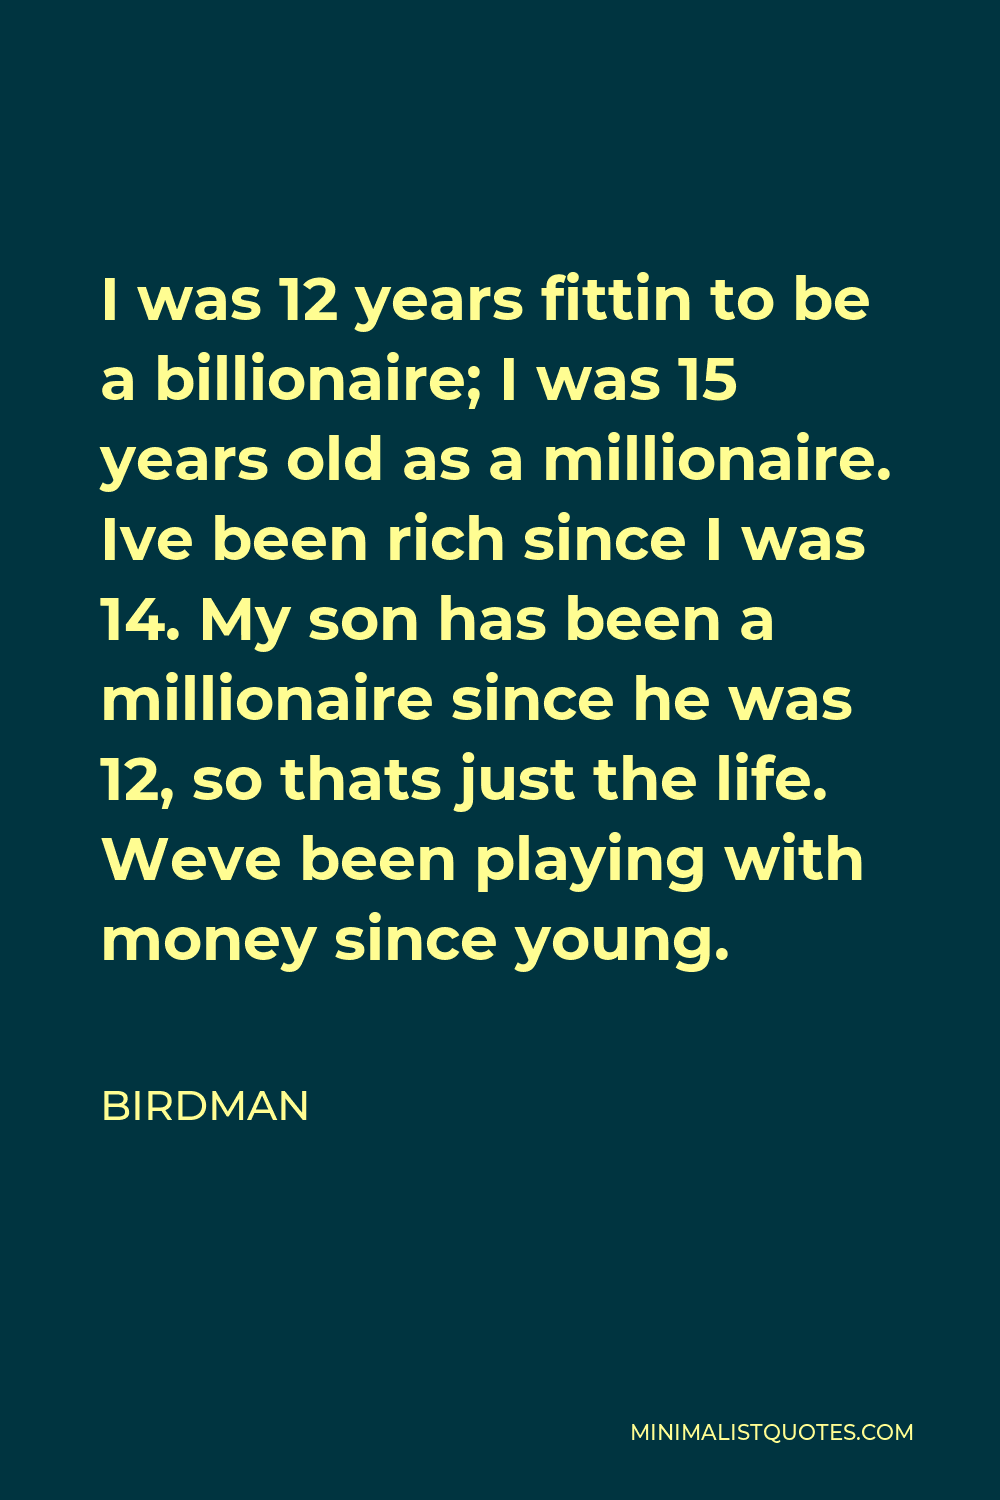 Birdman Quote - I was 12 years fittin to be a billionaire; I was 15 years old as a millionaire. Ive been rich since I was 14. My son has been a millionaire since he was 12, so thats just the life. Weve been playing with money since young.